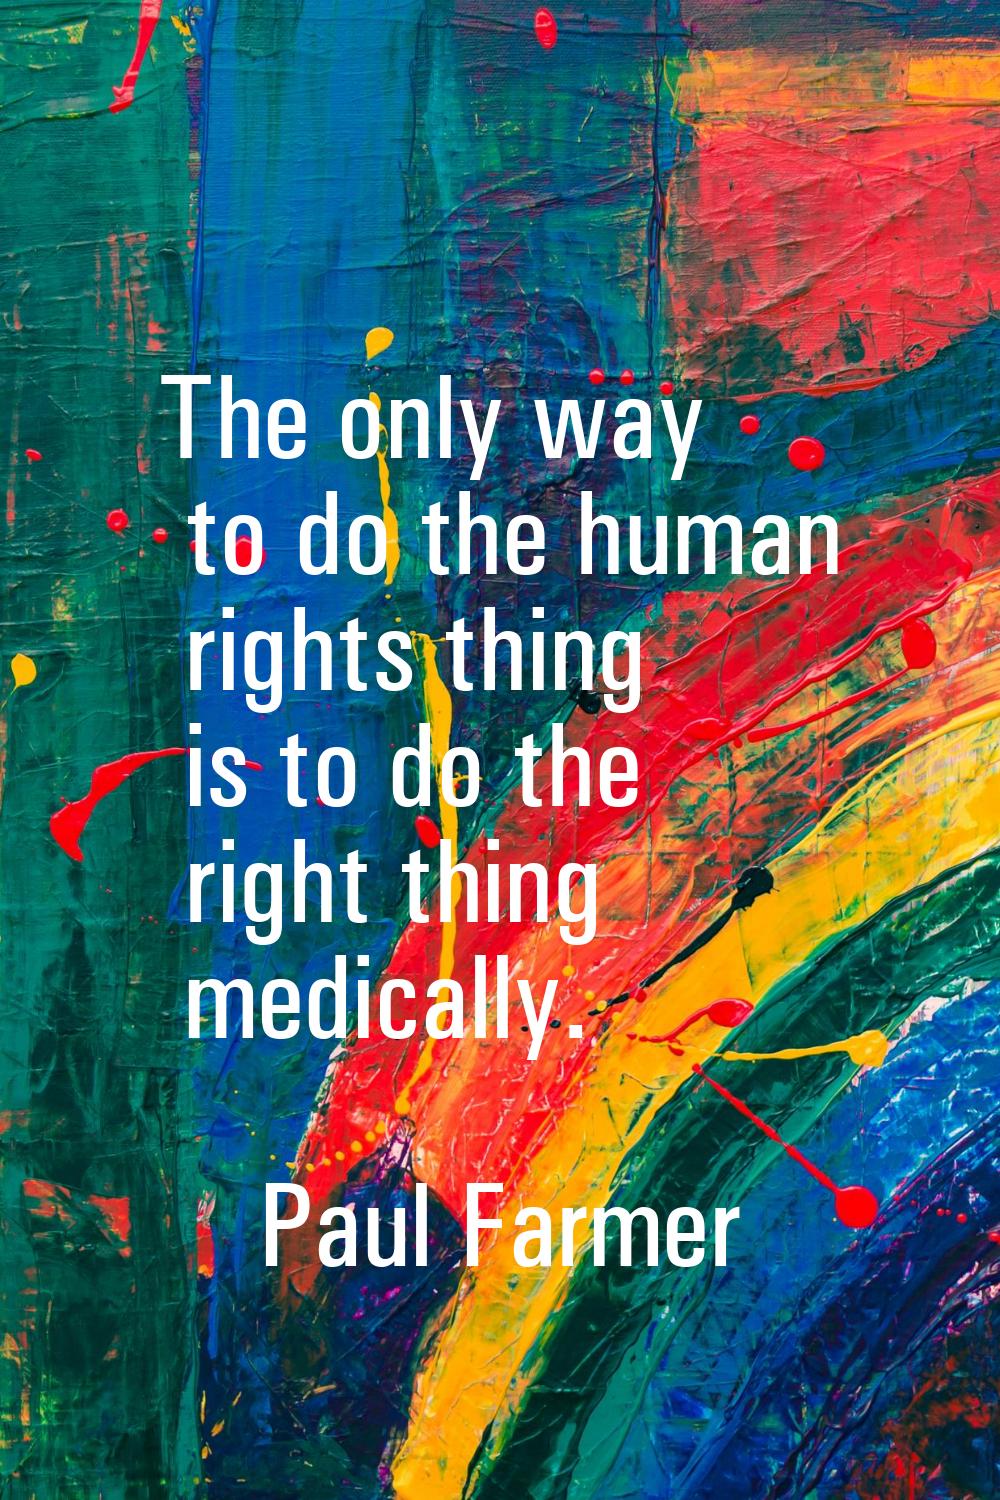 The only way to do the human rights thing is to do the right thing medically.